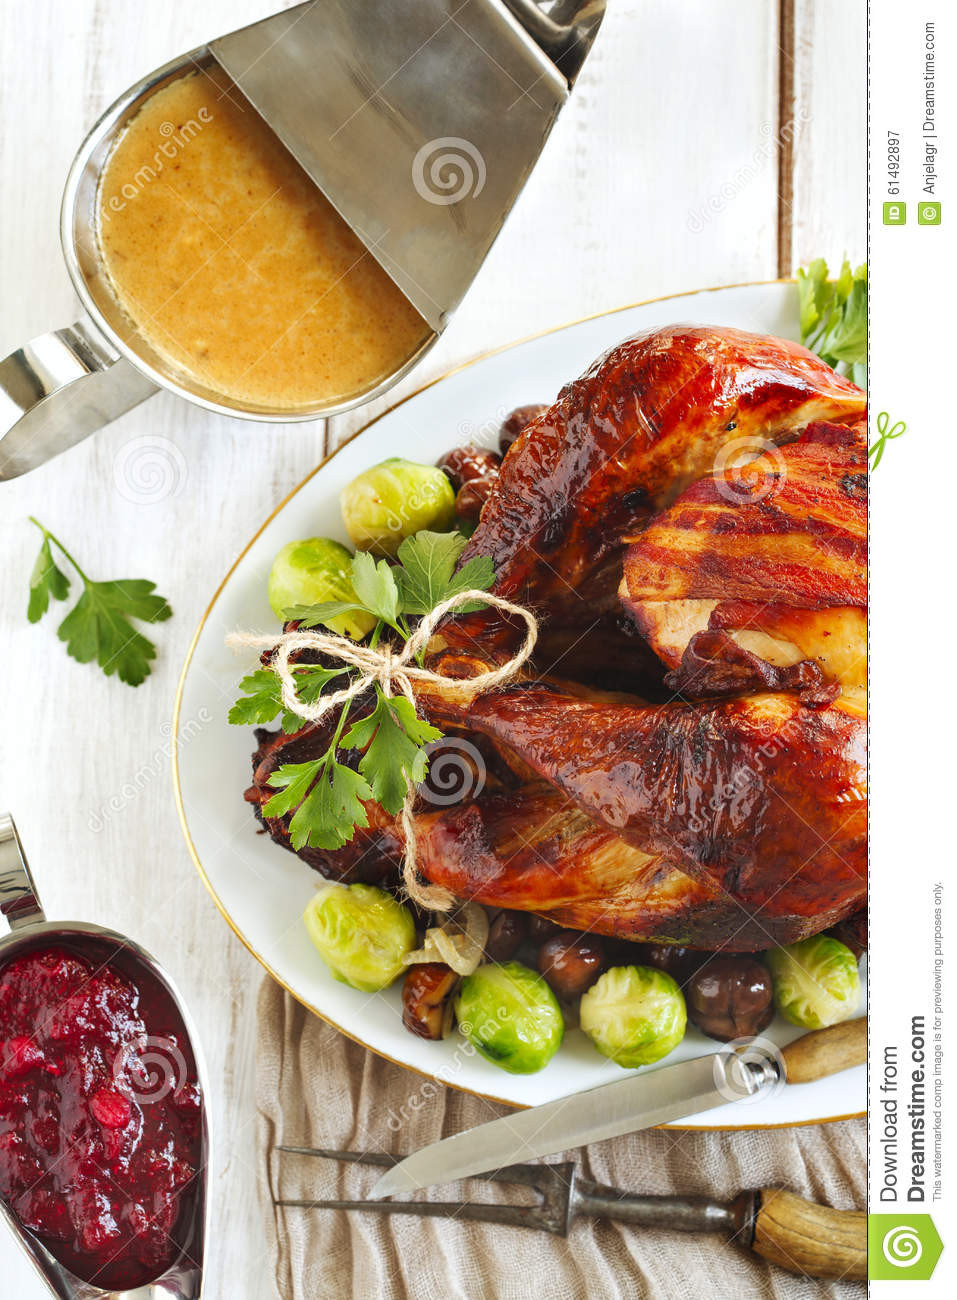 Sprouts Thanksgiving Turkey
 Roasted Turkey With Bacon And Garnished With Chestnuts And